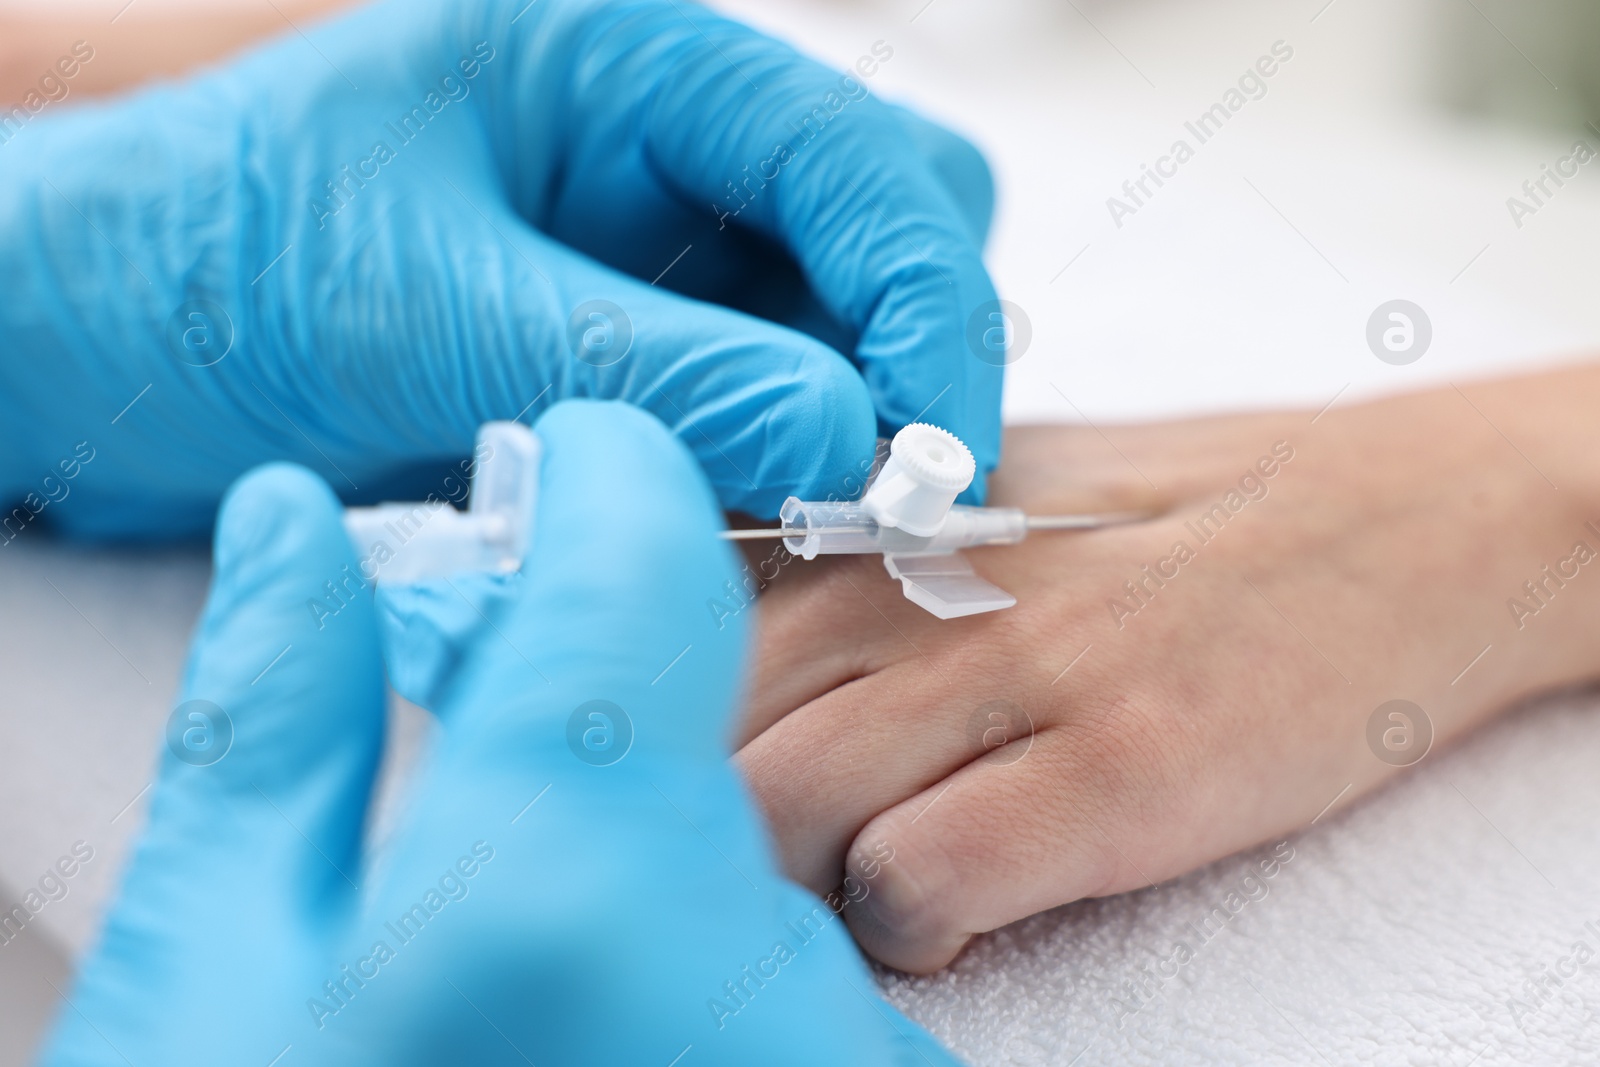 Photo of Nurse inputting catheter for IV drip in patient hand, closeup